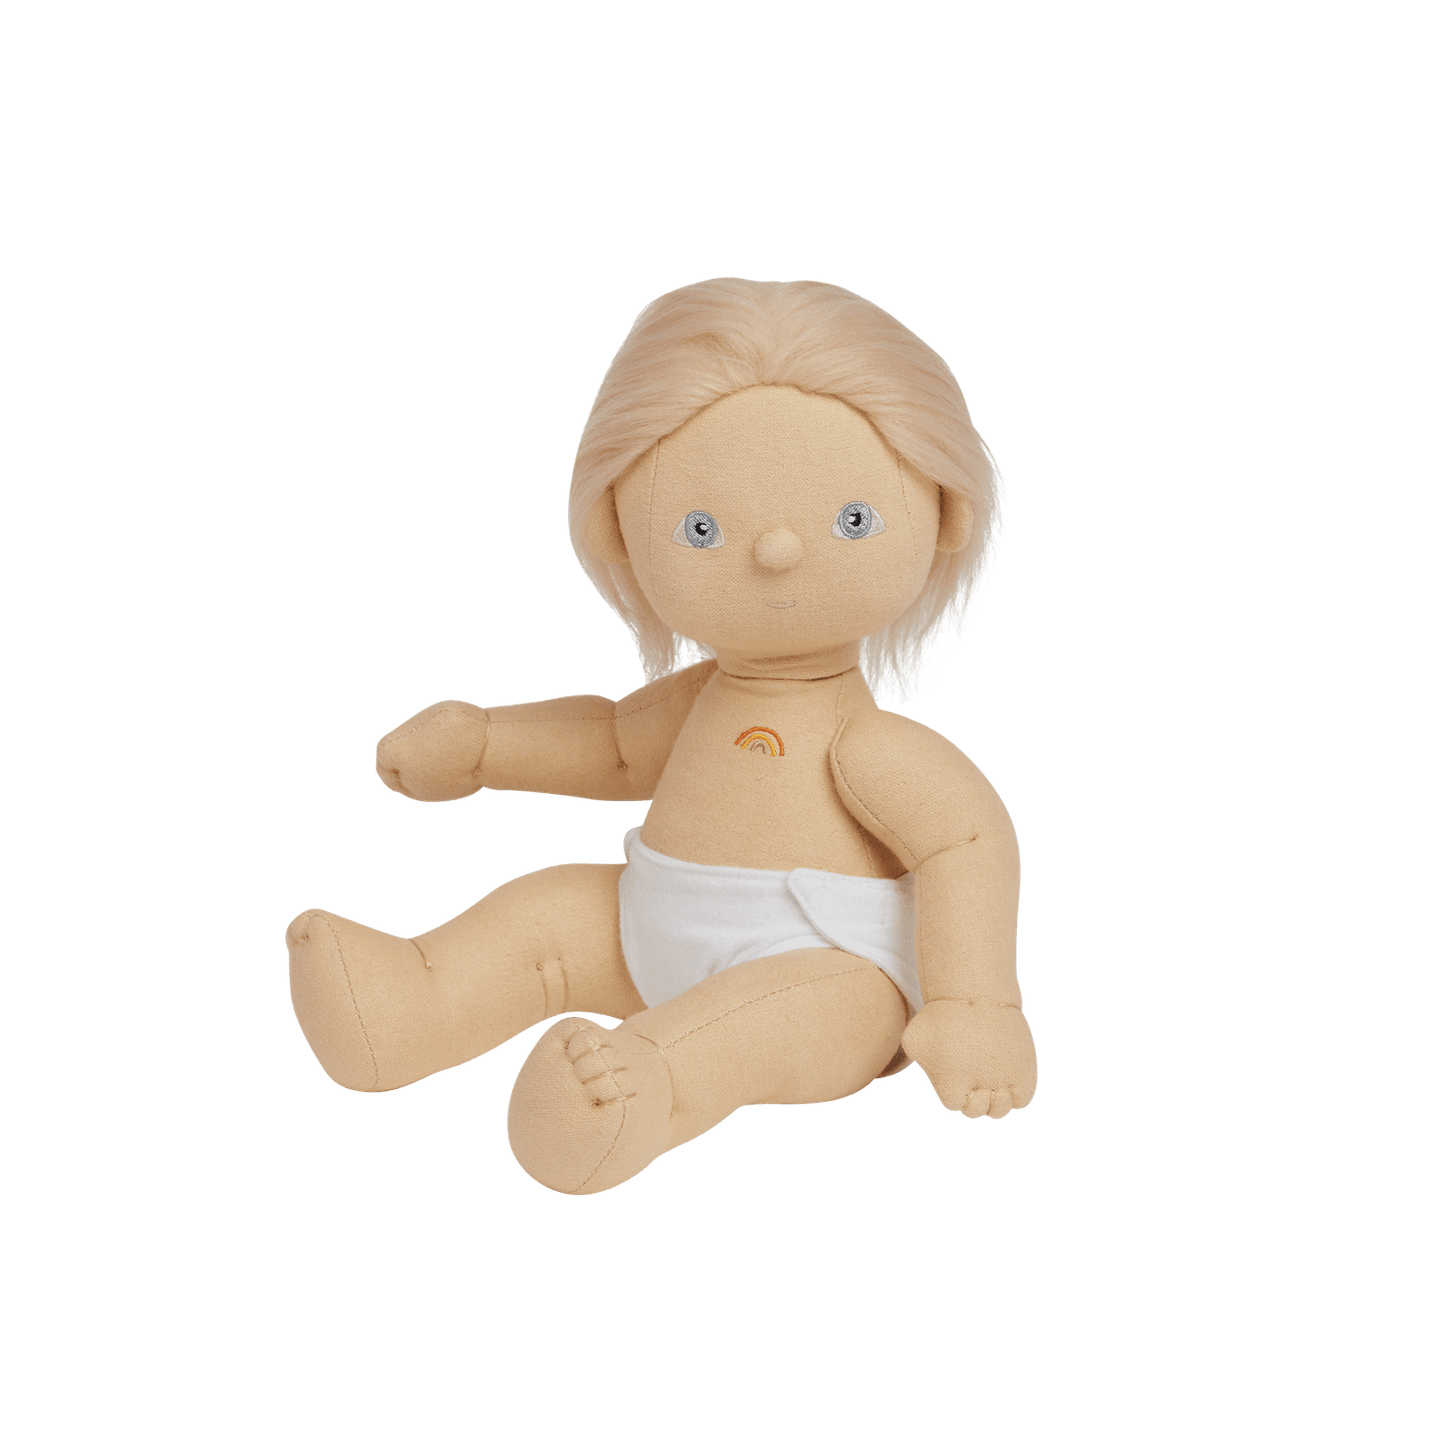 Load image into Gallery viewer, Olli Ella Dinkum Doll-Petal, Olli Ella Doll, Olli Ella Petal, Petal Dinkum Doll, Olli and Ella Doll, Olli Ella Dinkum Doll Petal, Nottinghamshire Stockist, Independent Kids Store, Midlands Stockist, Birthday Gift, Children’s Doll
